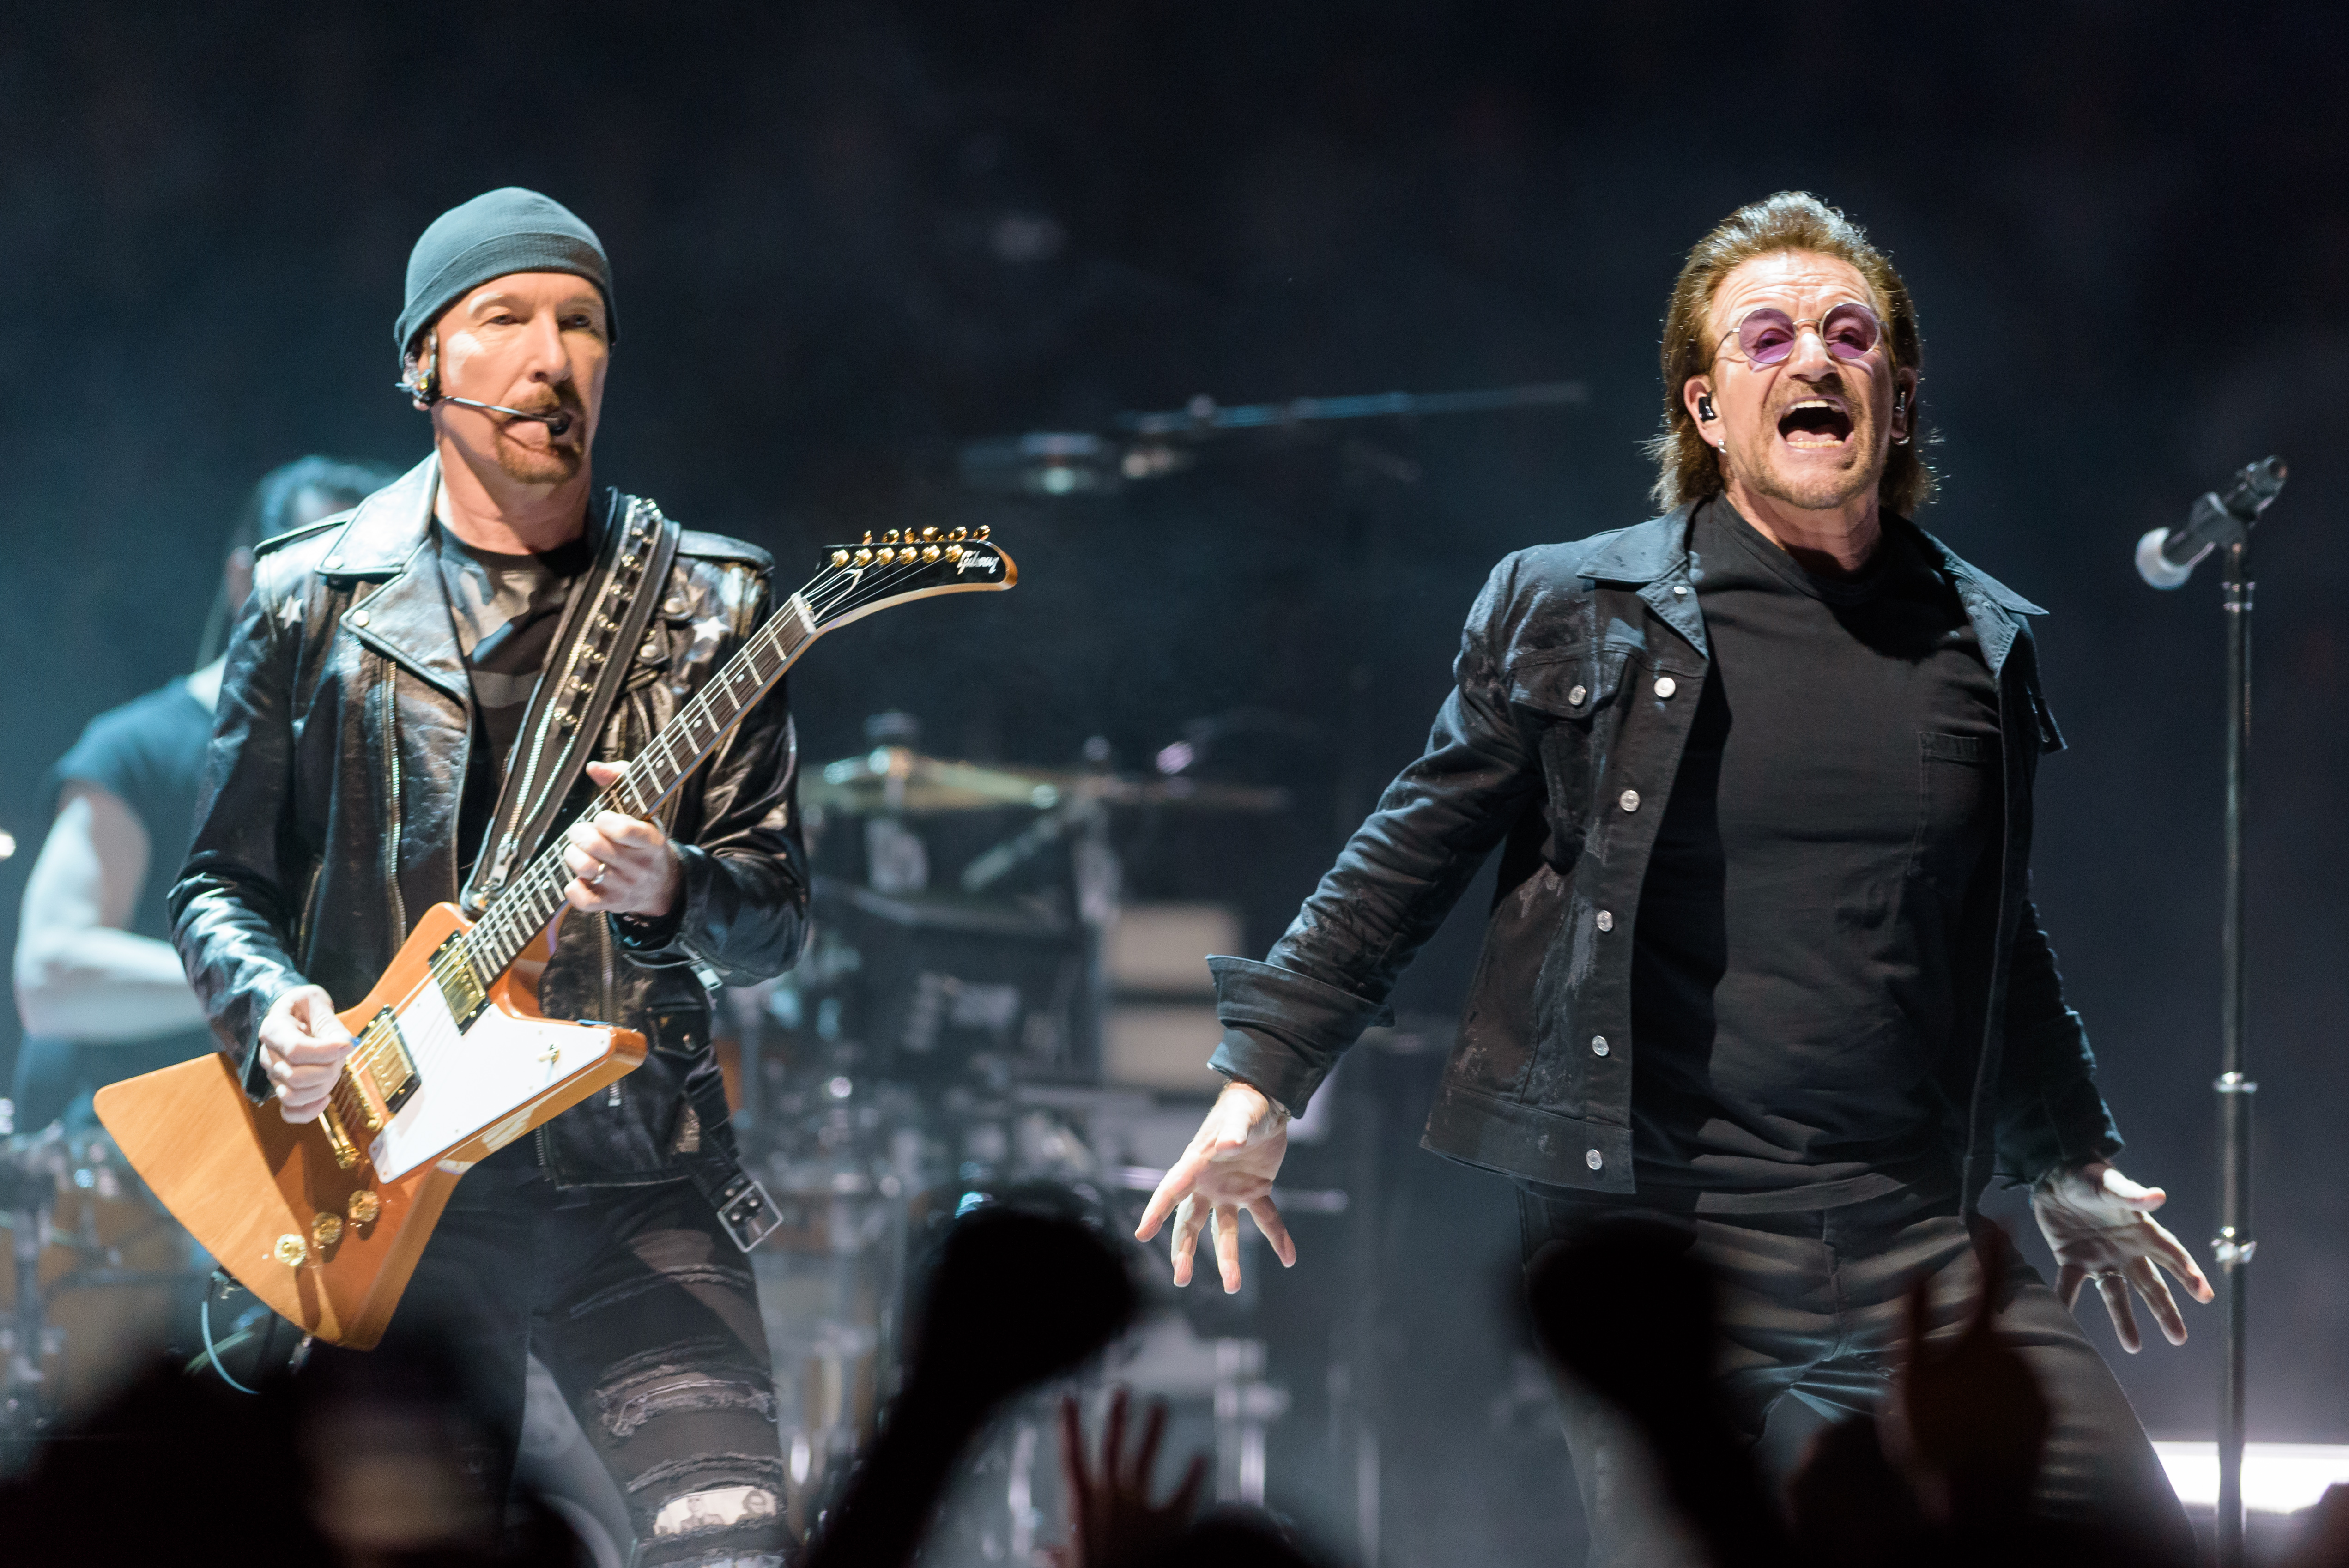 U2 Performs at Capital One Arena in Washington, D.C.